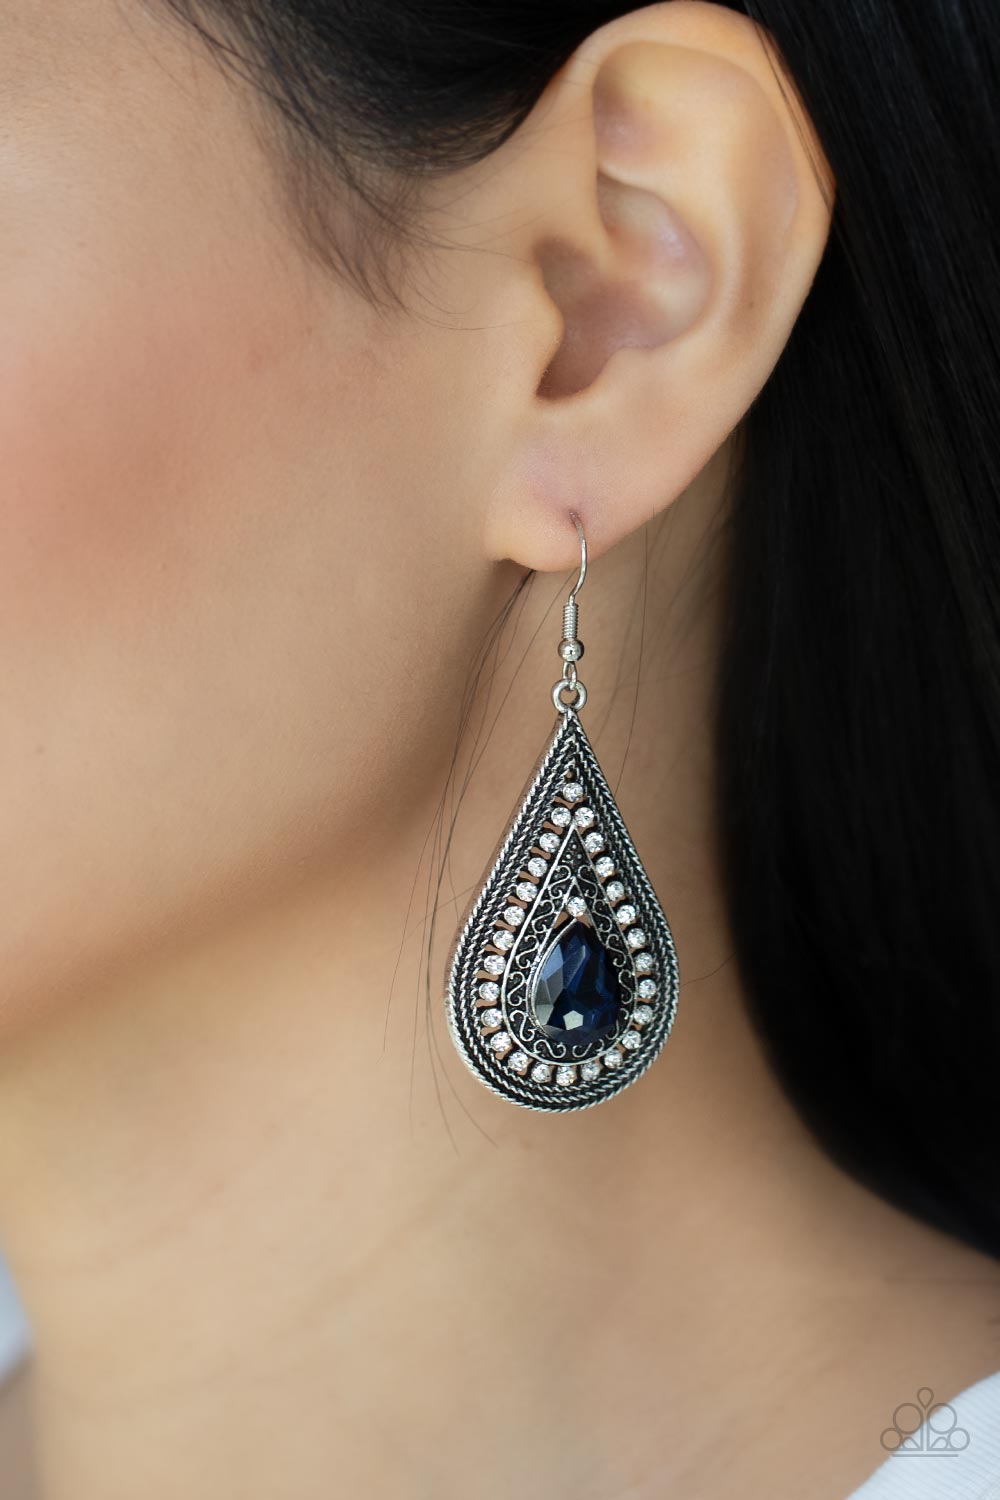 Metro Masquerade Blue Gem Earrings - Paparazzi Accessories-on model - CarasShop.com - $5 Jewelry by Cara Jewels